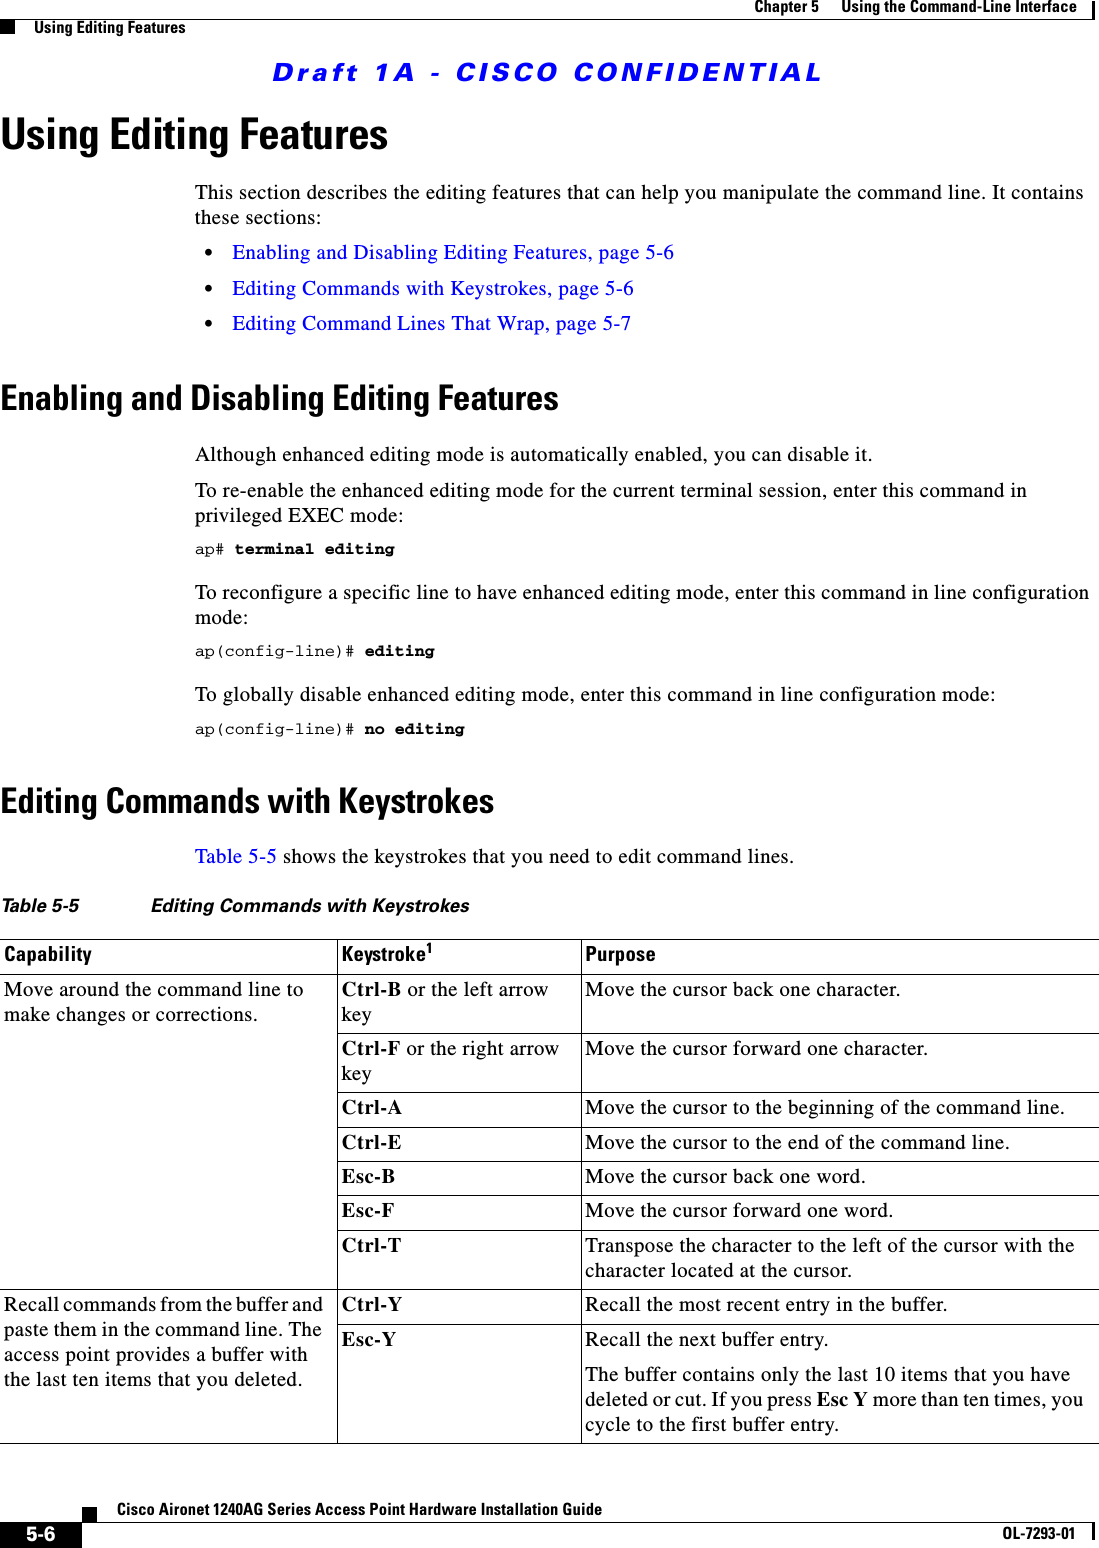 Draft 1A - CISCO CONFIDENTIAL5-6Cisco Aironet 1240AG Series Access Point Hardware Installation GuideOL-7293-01Chapter 5      Using the Command-Line InterfaceUsing Editing FeaturesUsing Editing FeaturesThis section describes the editing features that can help you manipulate the command line. It contains these sections:•Enabling and Disabling Editing Features, page 5-6•Editing Commands with Keystrokes, page 5-6•Editing Command Lines That Wrap, page 5-7Enabling and Disabling Editing FeaturesAlthough enhanced editing mode is automatically enabled, you can disable it.To re-enable the enhanced editing mode for the current terminal session, enter this command in privileged EXEC mode: ap# terminal editingTo reconfigure a specific line to have enhanced editing mode, enter this command in line configuration mode: ap(config-line)# editingTo globally disable enhanced editing mode, enter this command in line configuration mode: ap(config-line)# no editingEditing Commands with KeystrokesTable 5-5 shows the keystrokes that you need to edit command lines.Table 5-5 Editing Commands with KeystrokesCapability Keystroke1PurposeMove around the command line to make changes or corrections.Ctrl-B or the left arrow keyMove the cursor back one character. Ctrl-F or the right arrow keyMove the cursor forward one character. Ctrl-A Move the cursor to the beginning of the command line.Ctrl-E Move the cursor to the end of the command line.Esc-B Move the cursor back one word.Esc-F Move the cursor forward one word.Ctrl-T Transpose the character to the left of the cursor with the character located at the cursor.Recall commands from the buffer and paste them in the command line. The access point provides a buffer with the last ten items that you deleted.Ctrl-Y Recall the most recent entry in the buffer.Esc-Y Recall the next buffer entry.The buffer contains only the last 10 items that you have deleted or cut. If you press Esc Y more than ten times, you cycle to the first buffer entry.